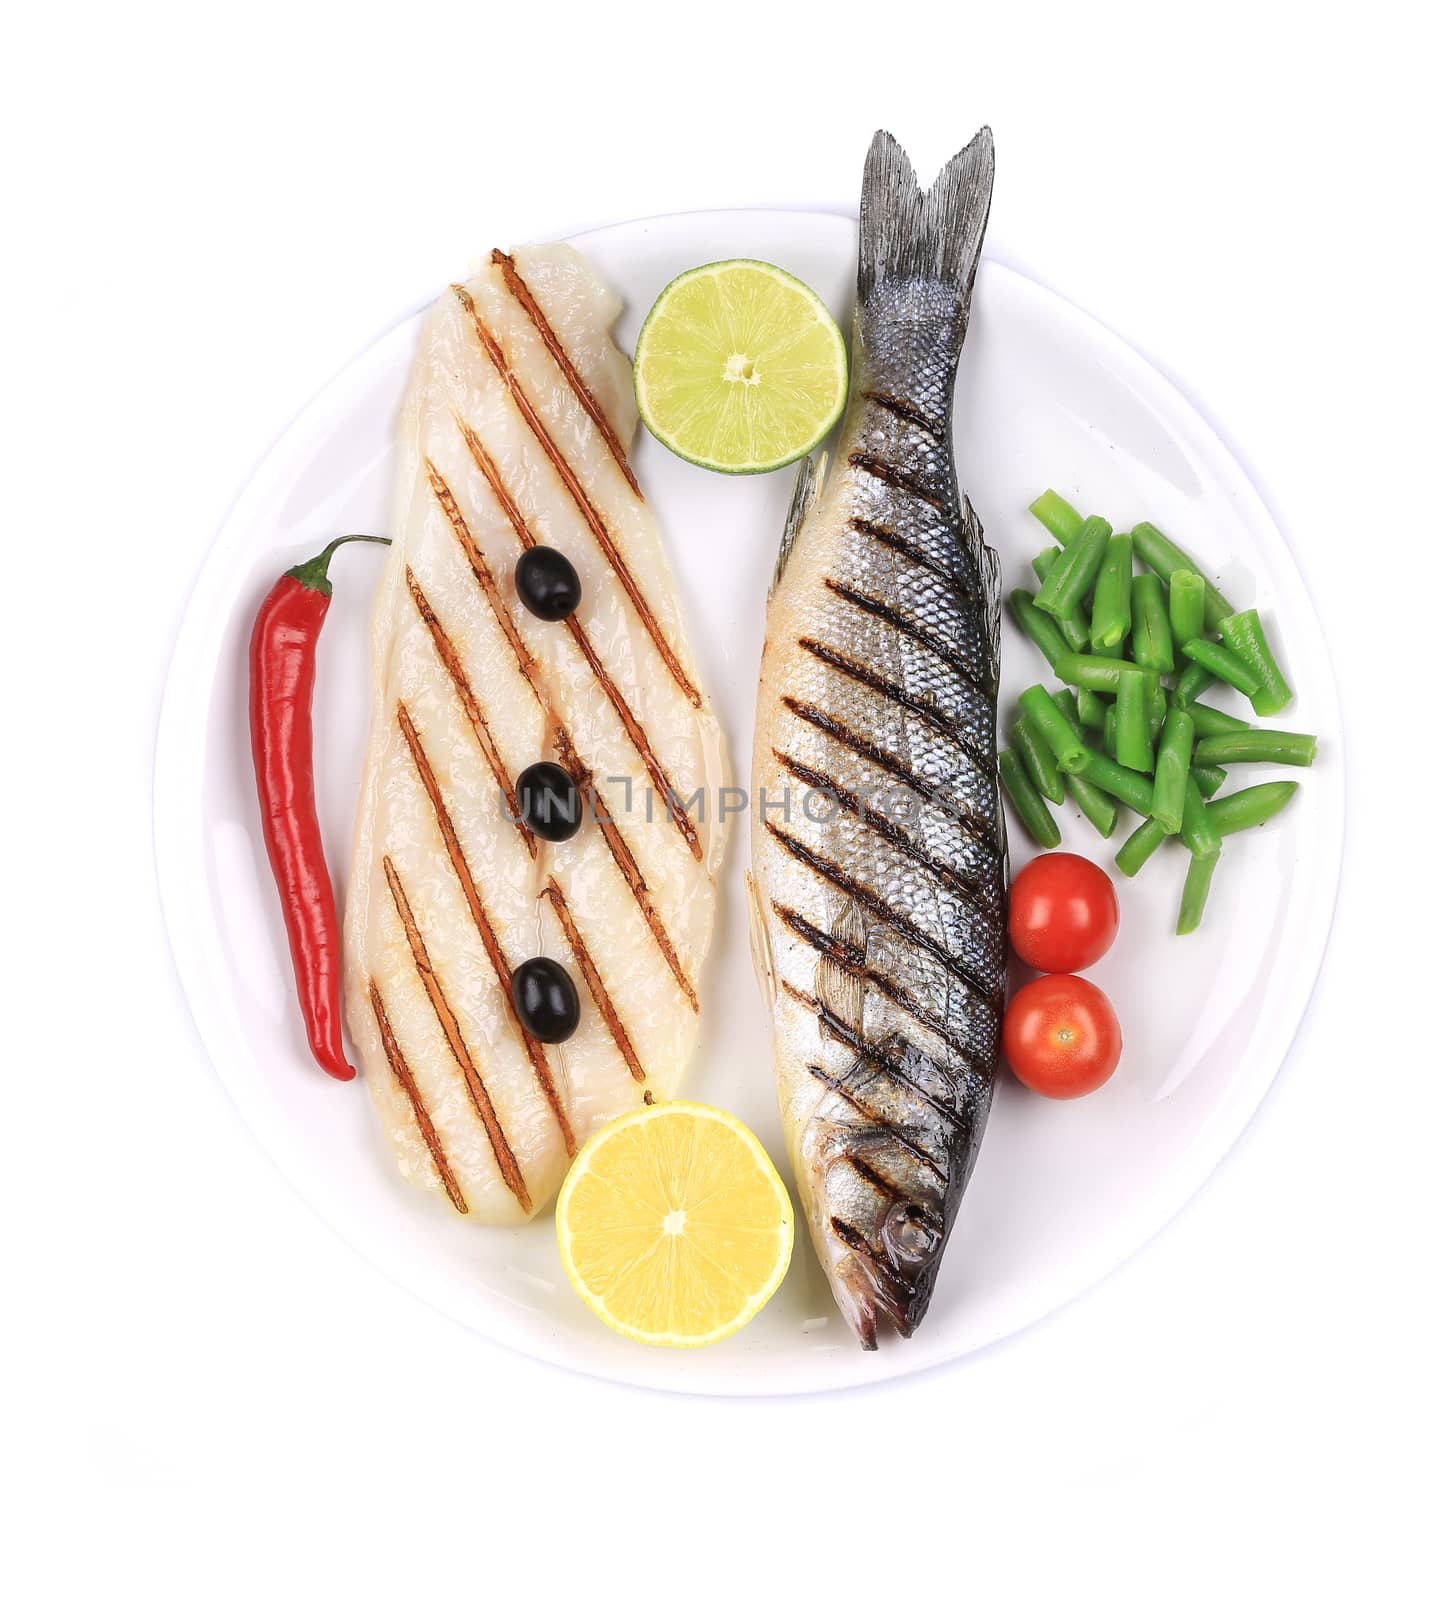 Grilled seabass with pangasius fillet. Isolated on a white background